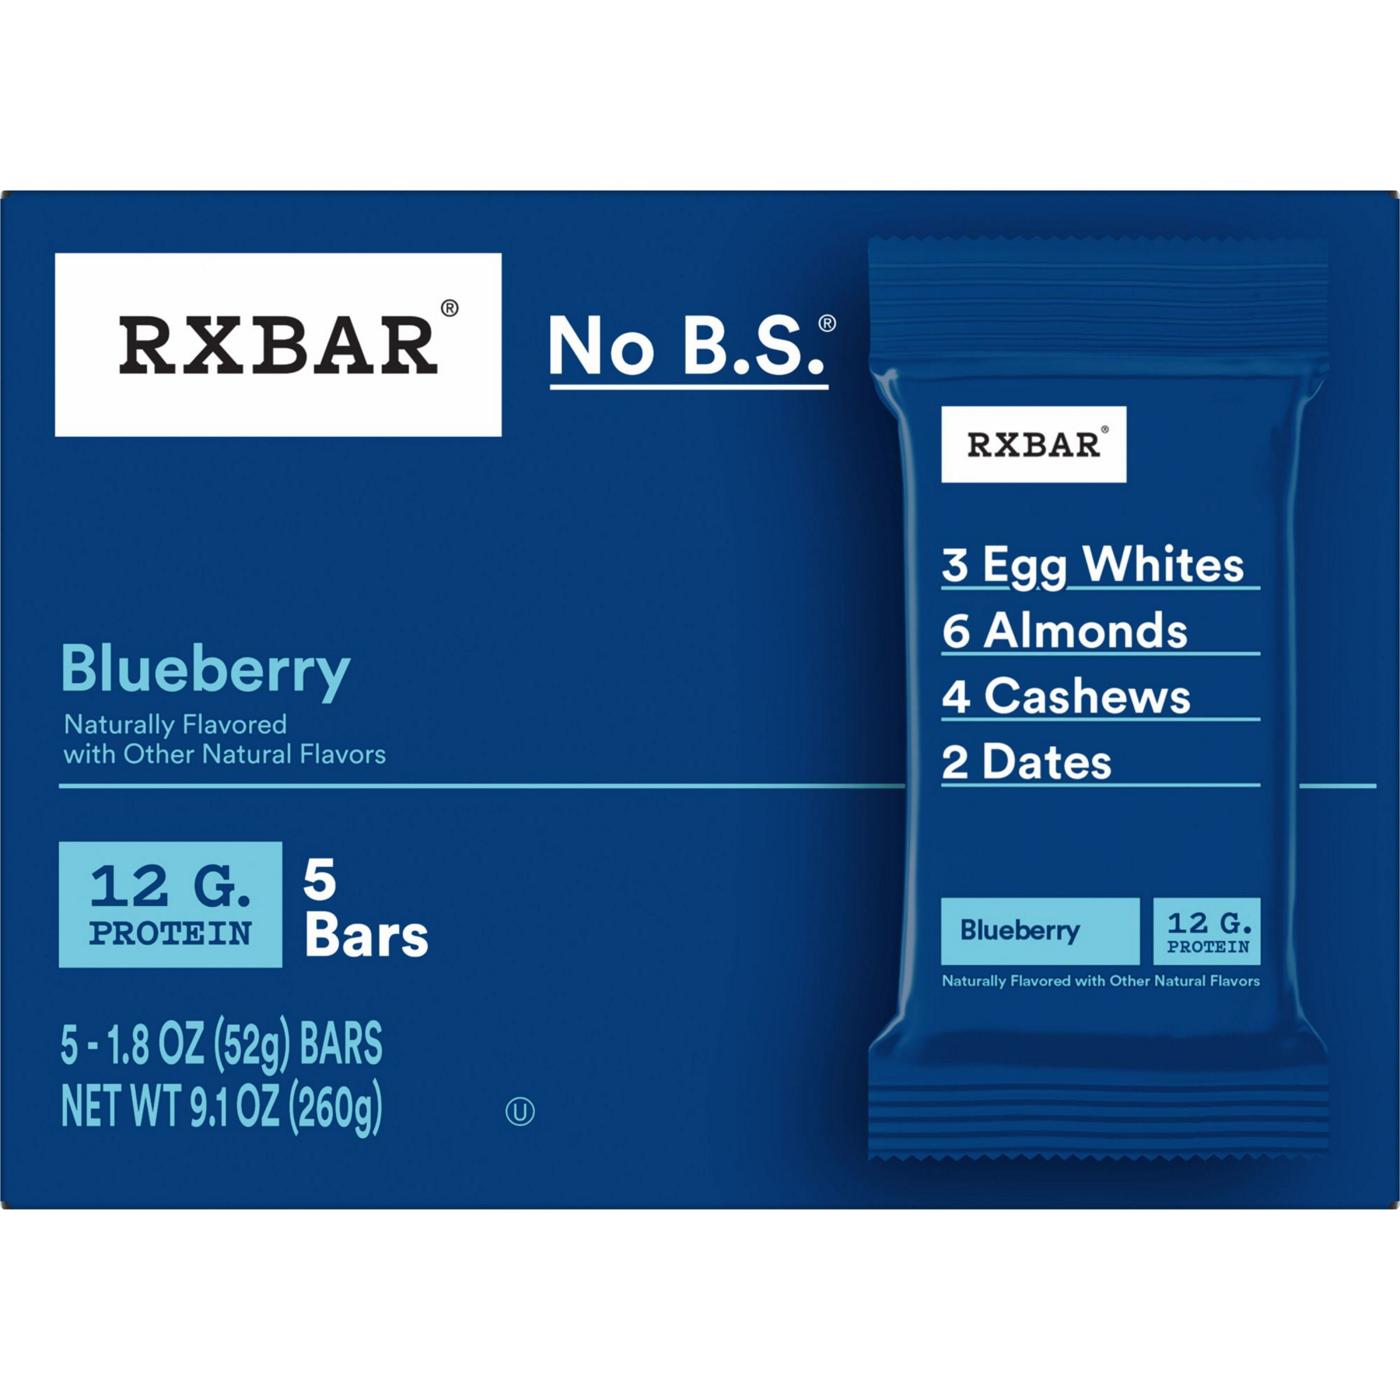 RXBAR Blueberry Protein Bars; image 2 of 3